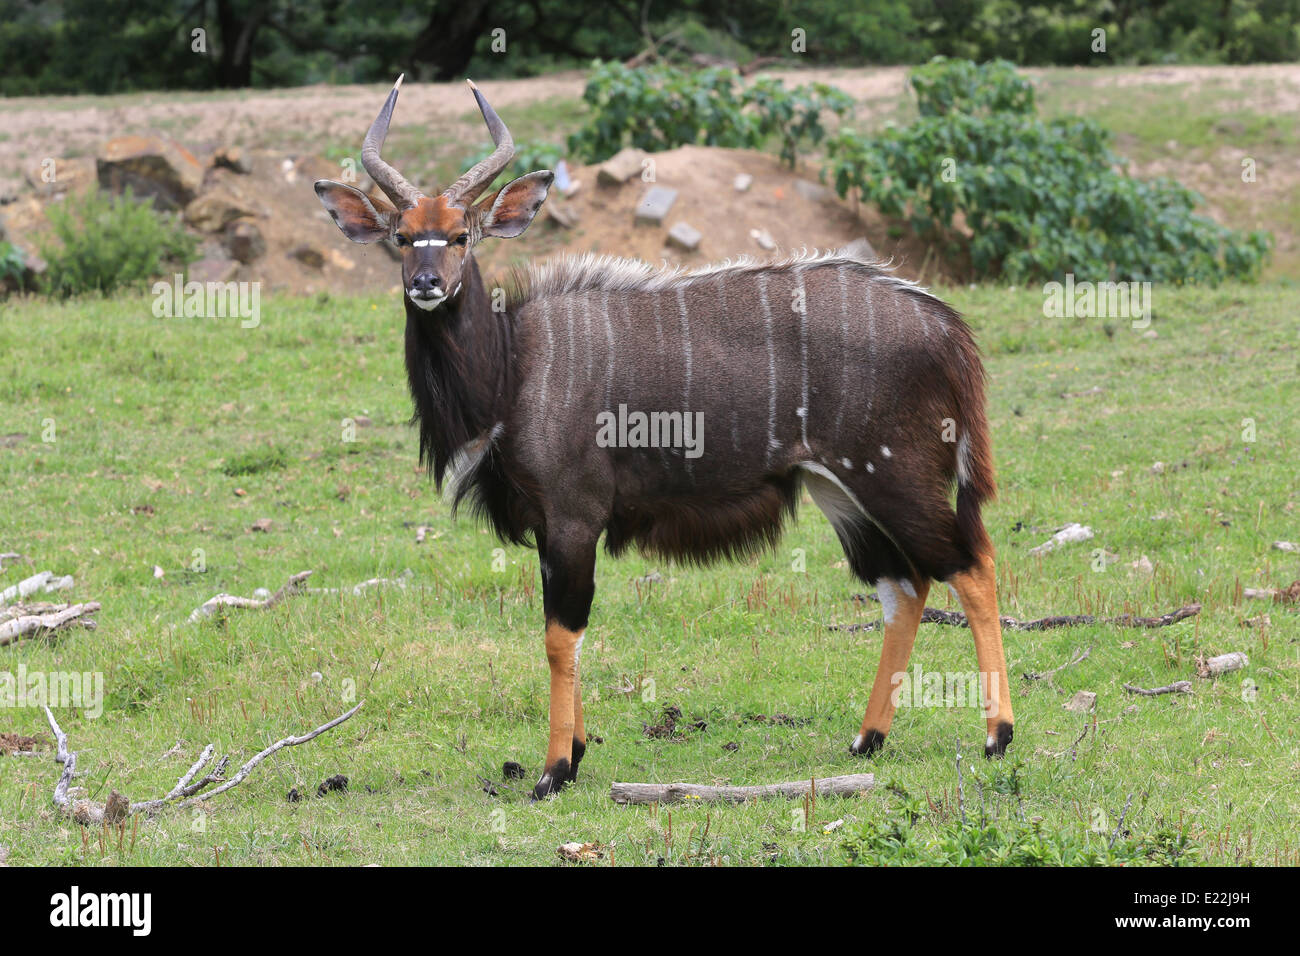 Male nyala standing on grassy field at the Mpongo Private Game Reserve, 25 km northwest of East London, South Africa. Stock Photo